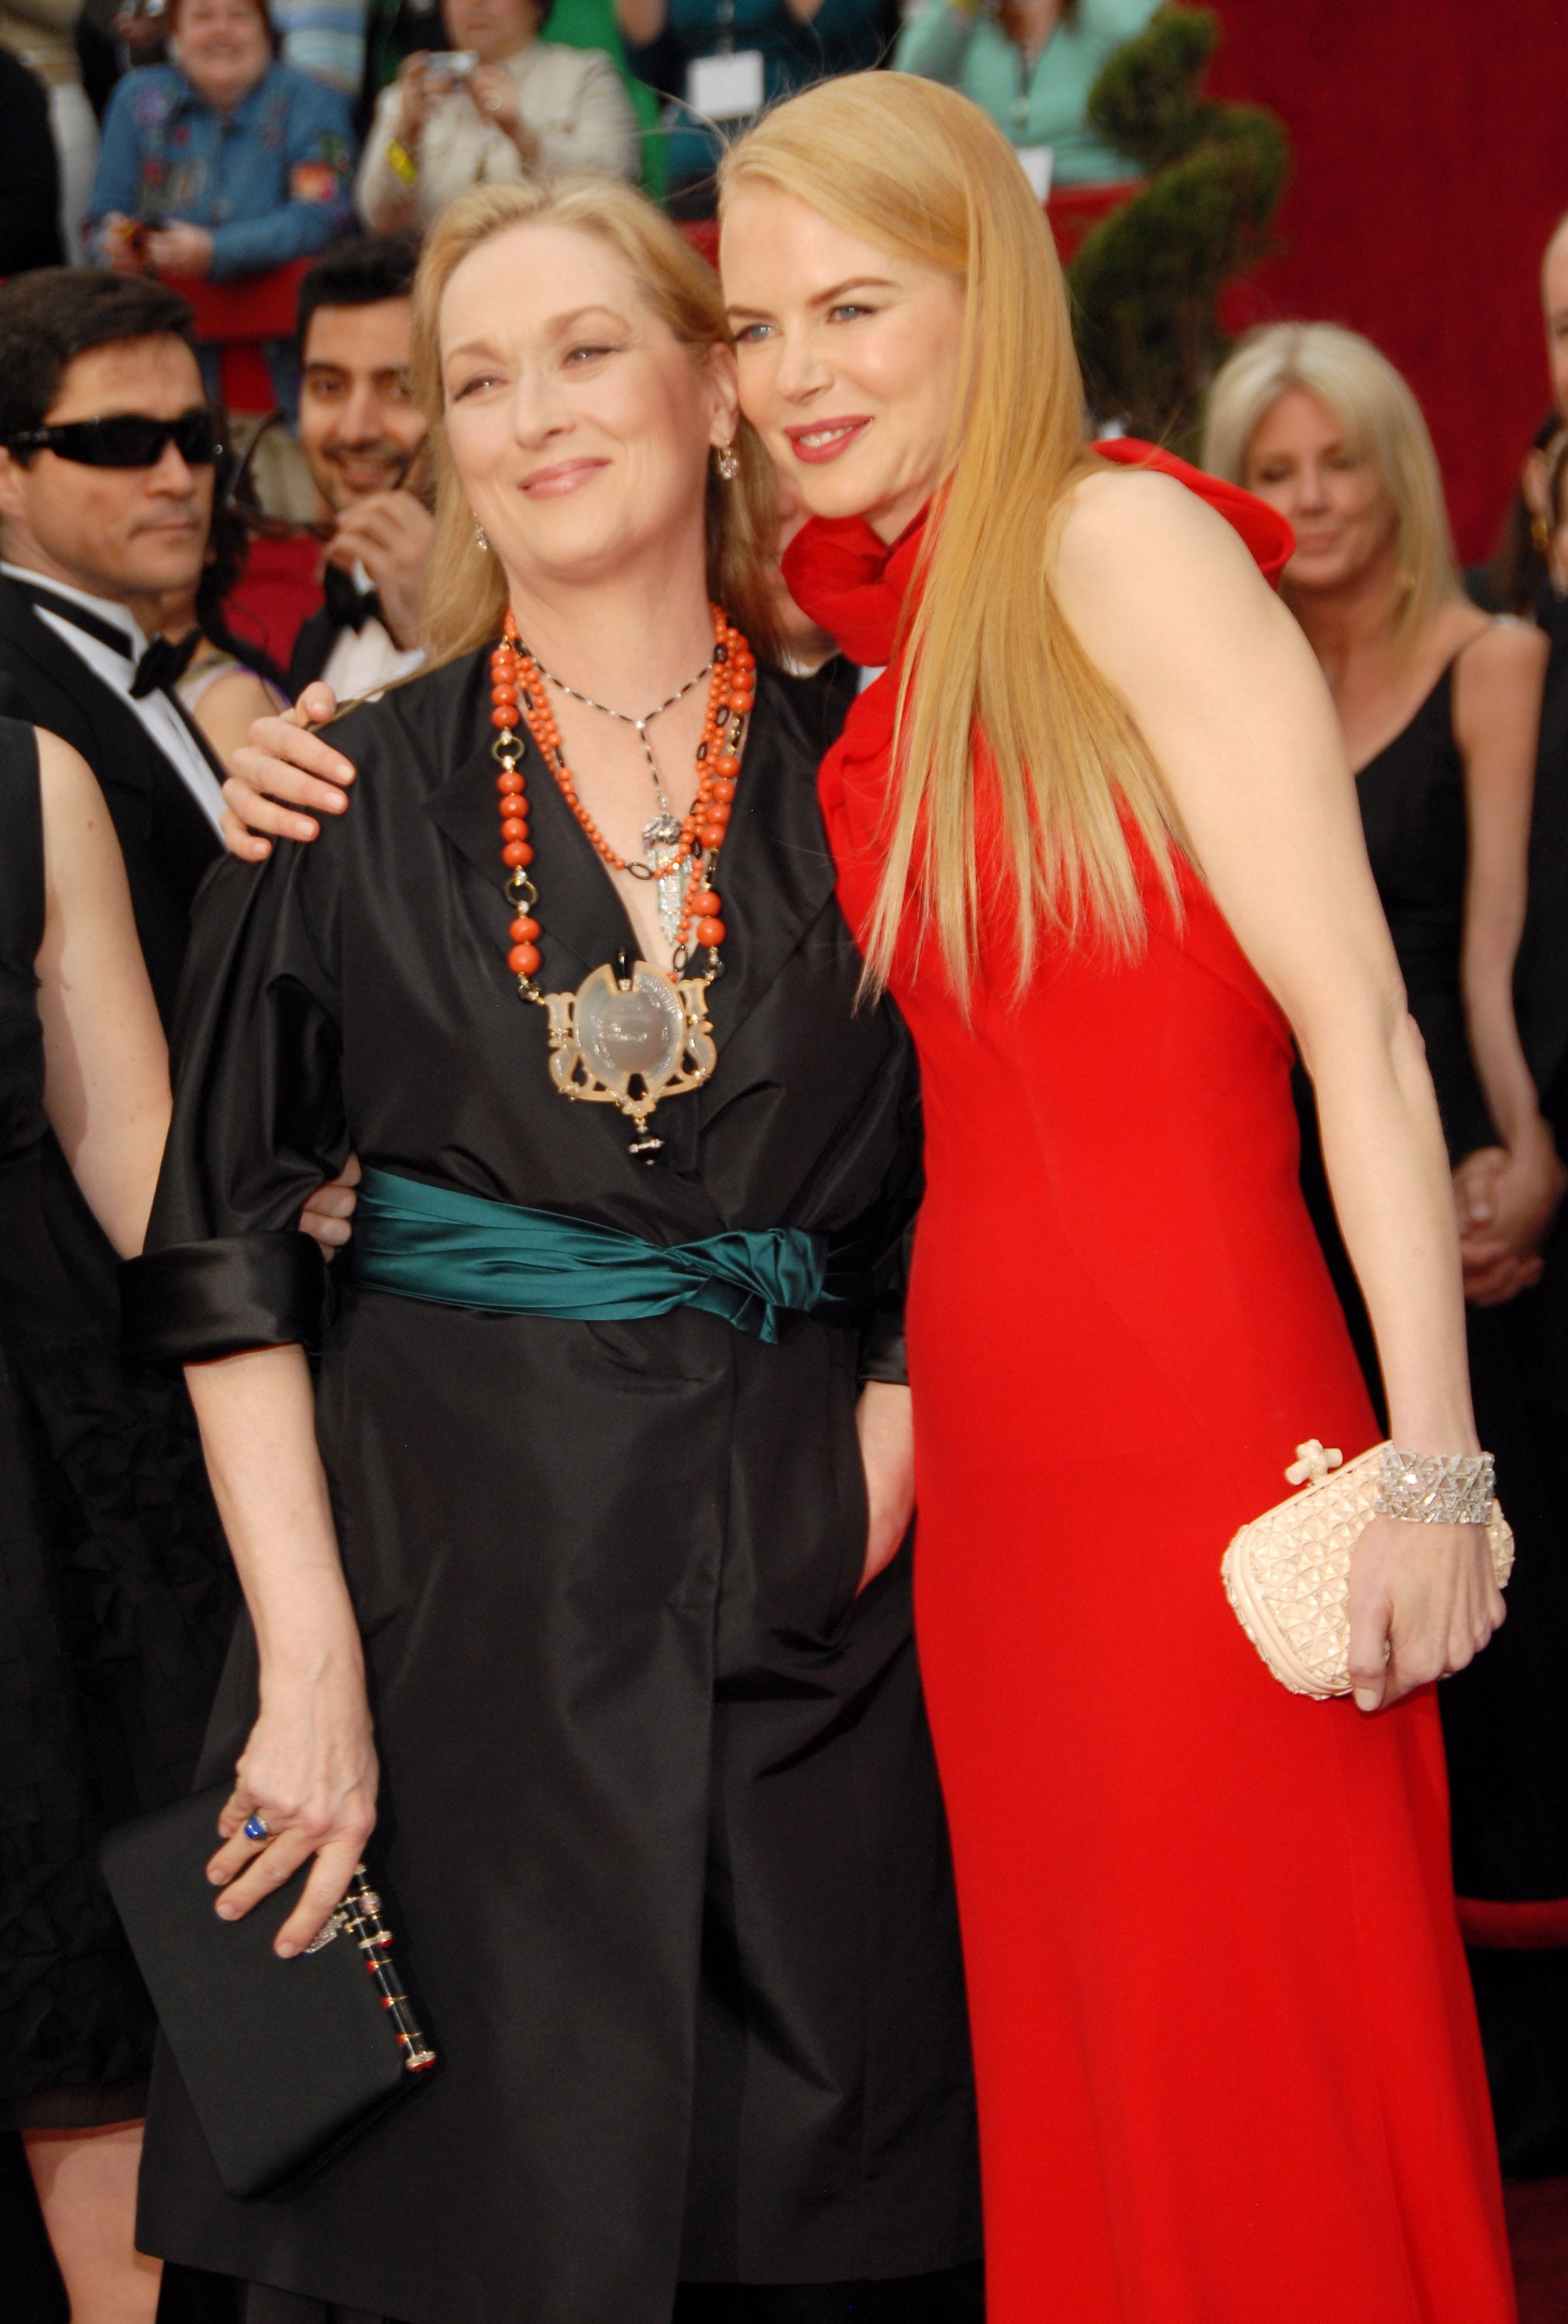 Pictures of Meryl Streep at the Oscars Over the Years | POPSUGAR Celebrity